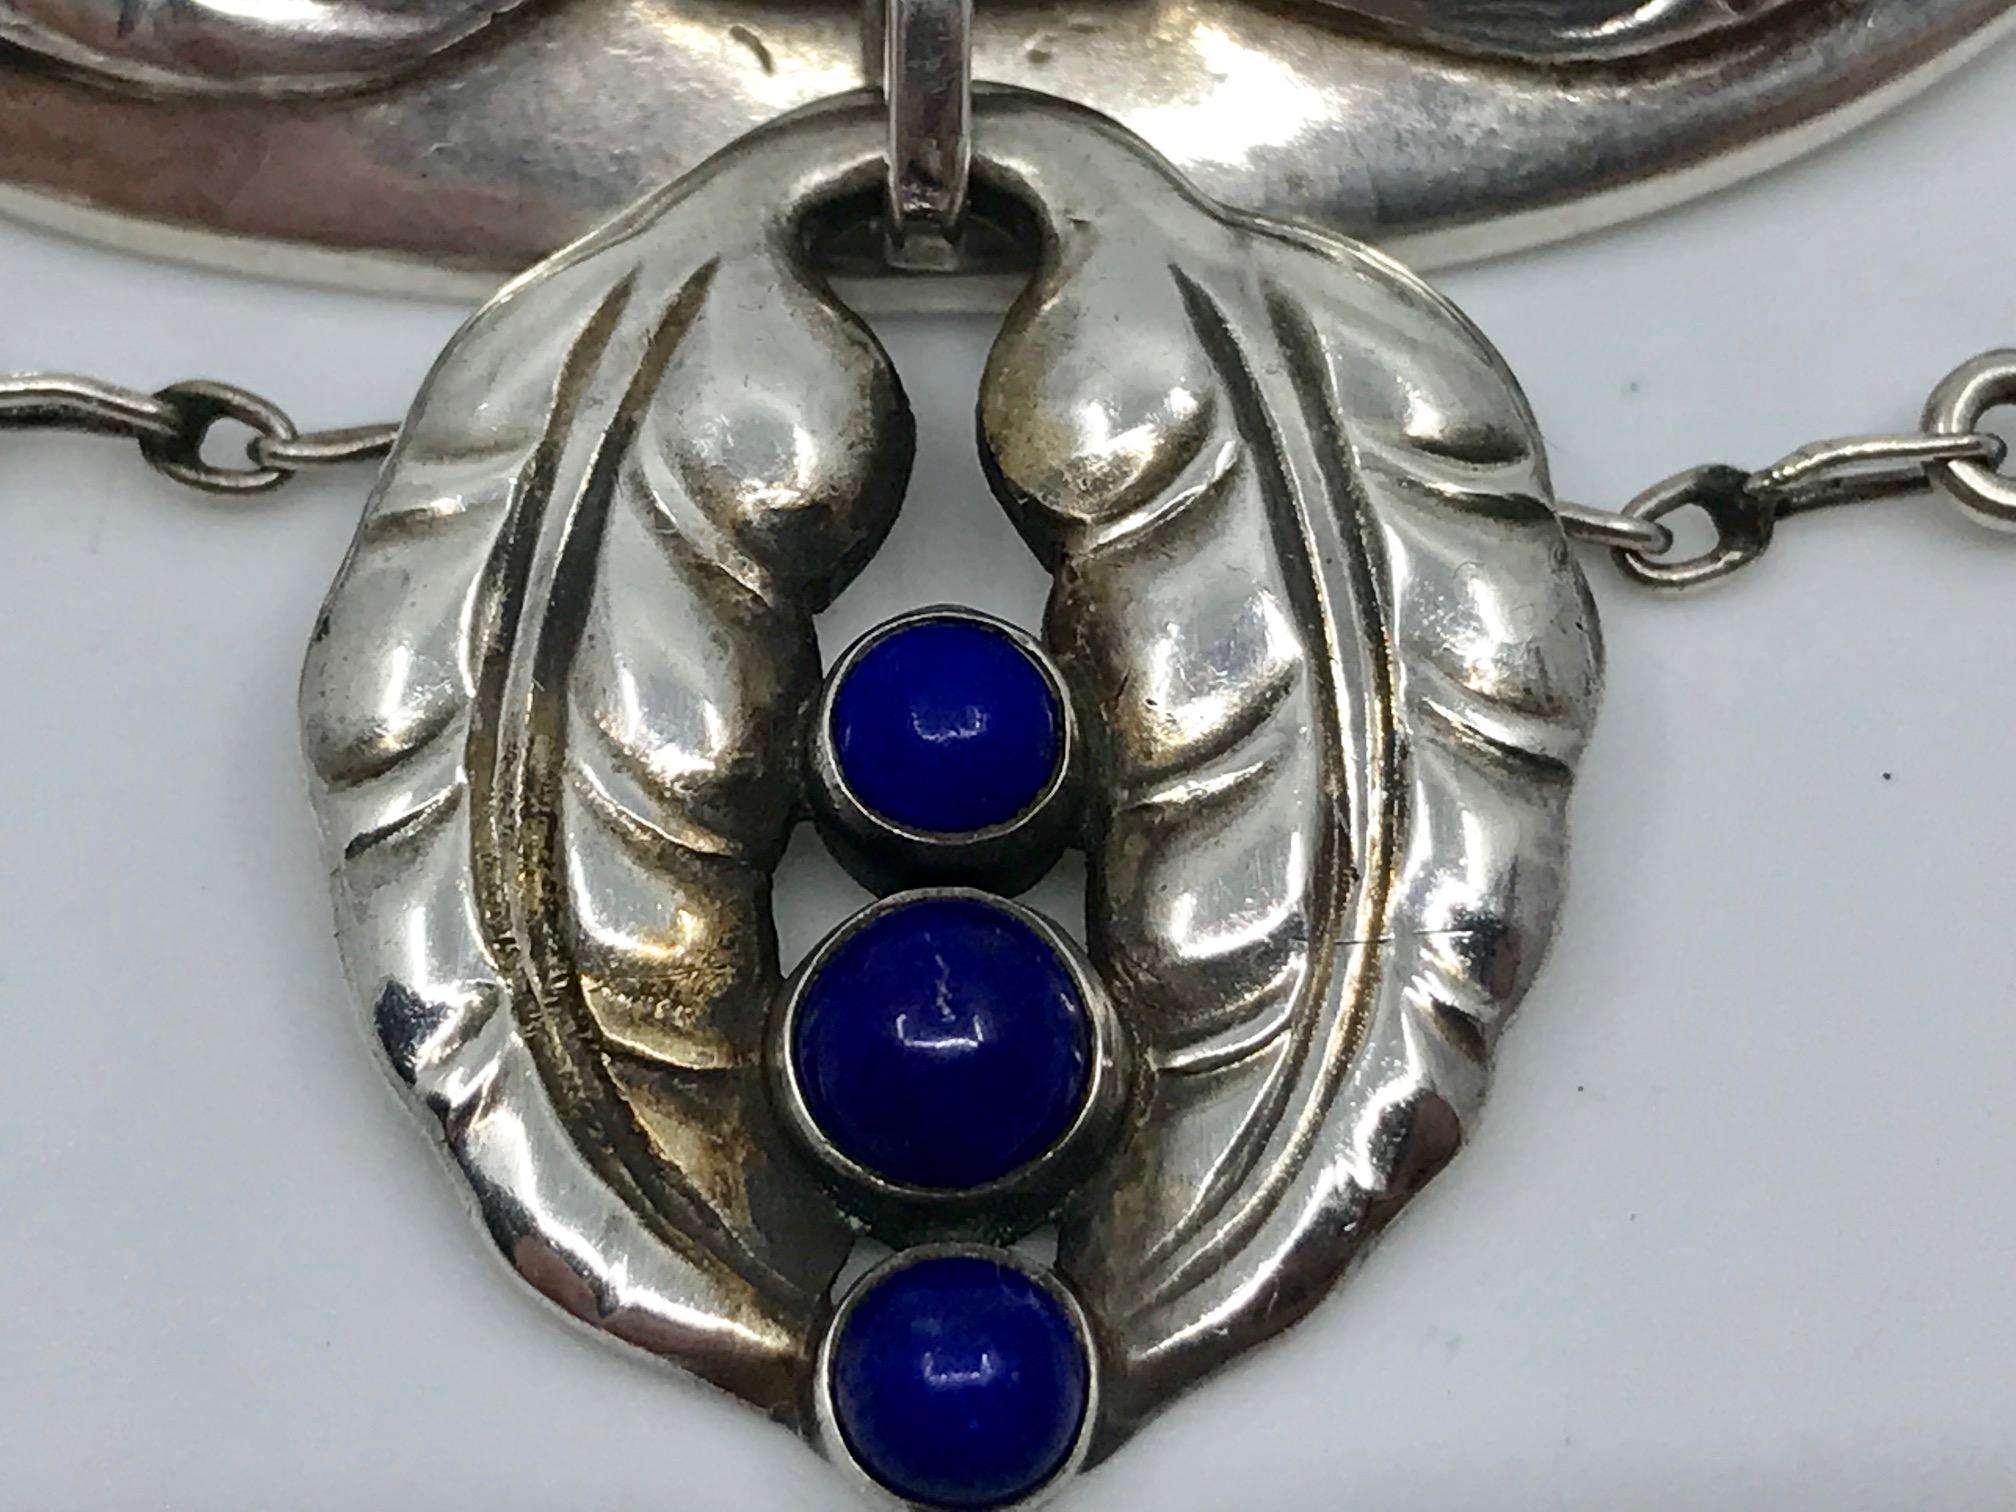 This is a rare antique Georg Jensen silver brooch with seven cabochon set lapis lazuli stones, design #26 by Georg Jensen.
Measures 2½” x 3″ (6.4cm x 7.6cm).
Antique Georg Jensen hallmarks from 1908-1914, 828s.